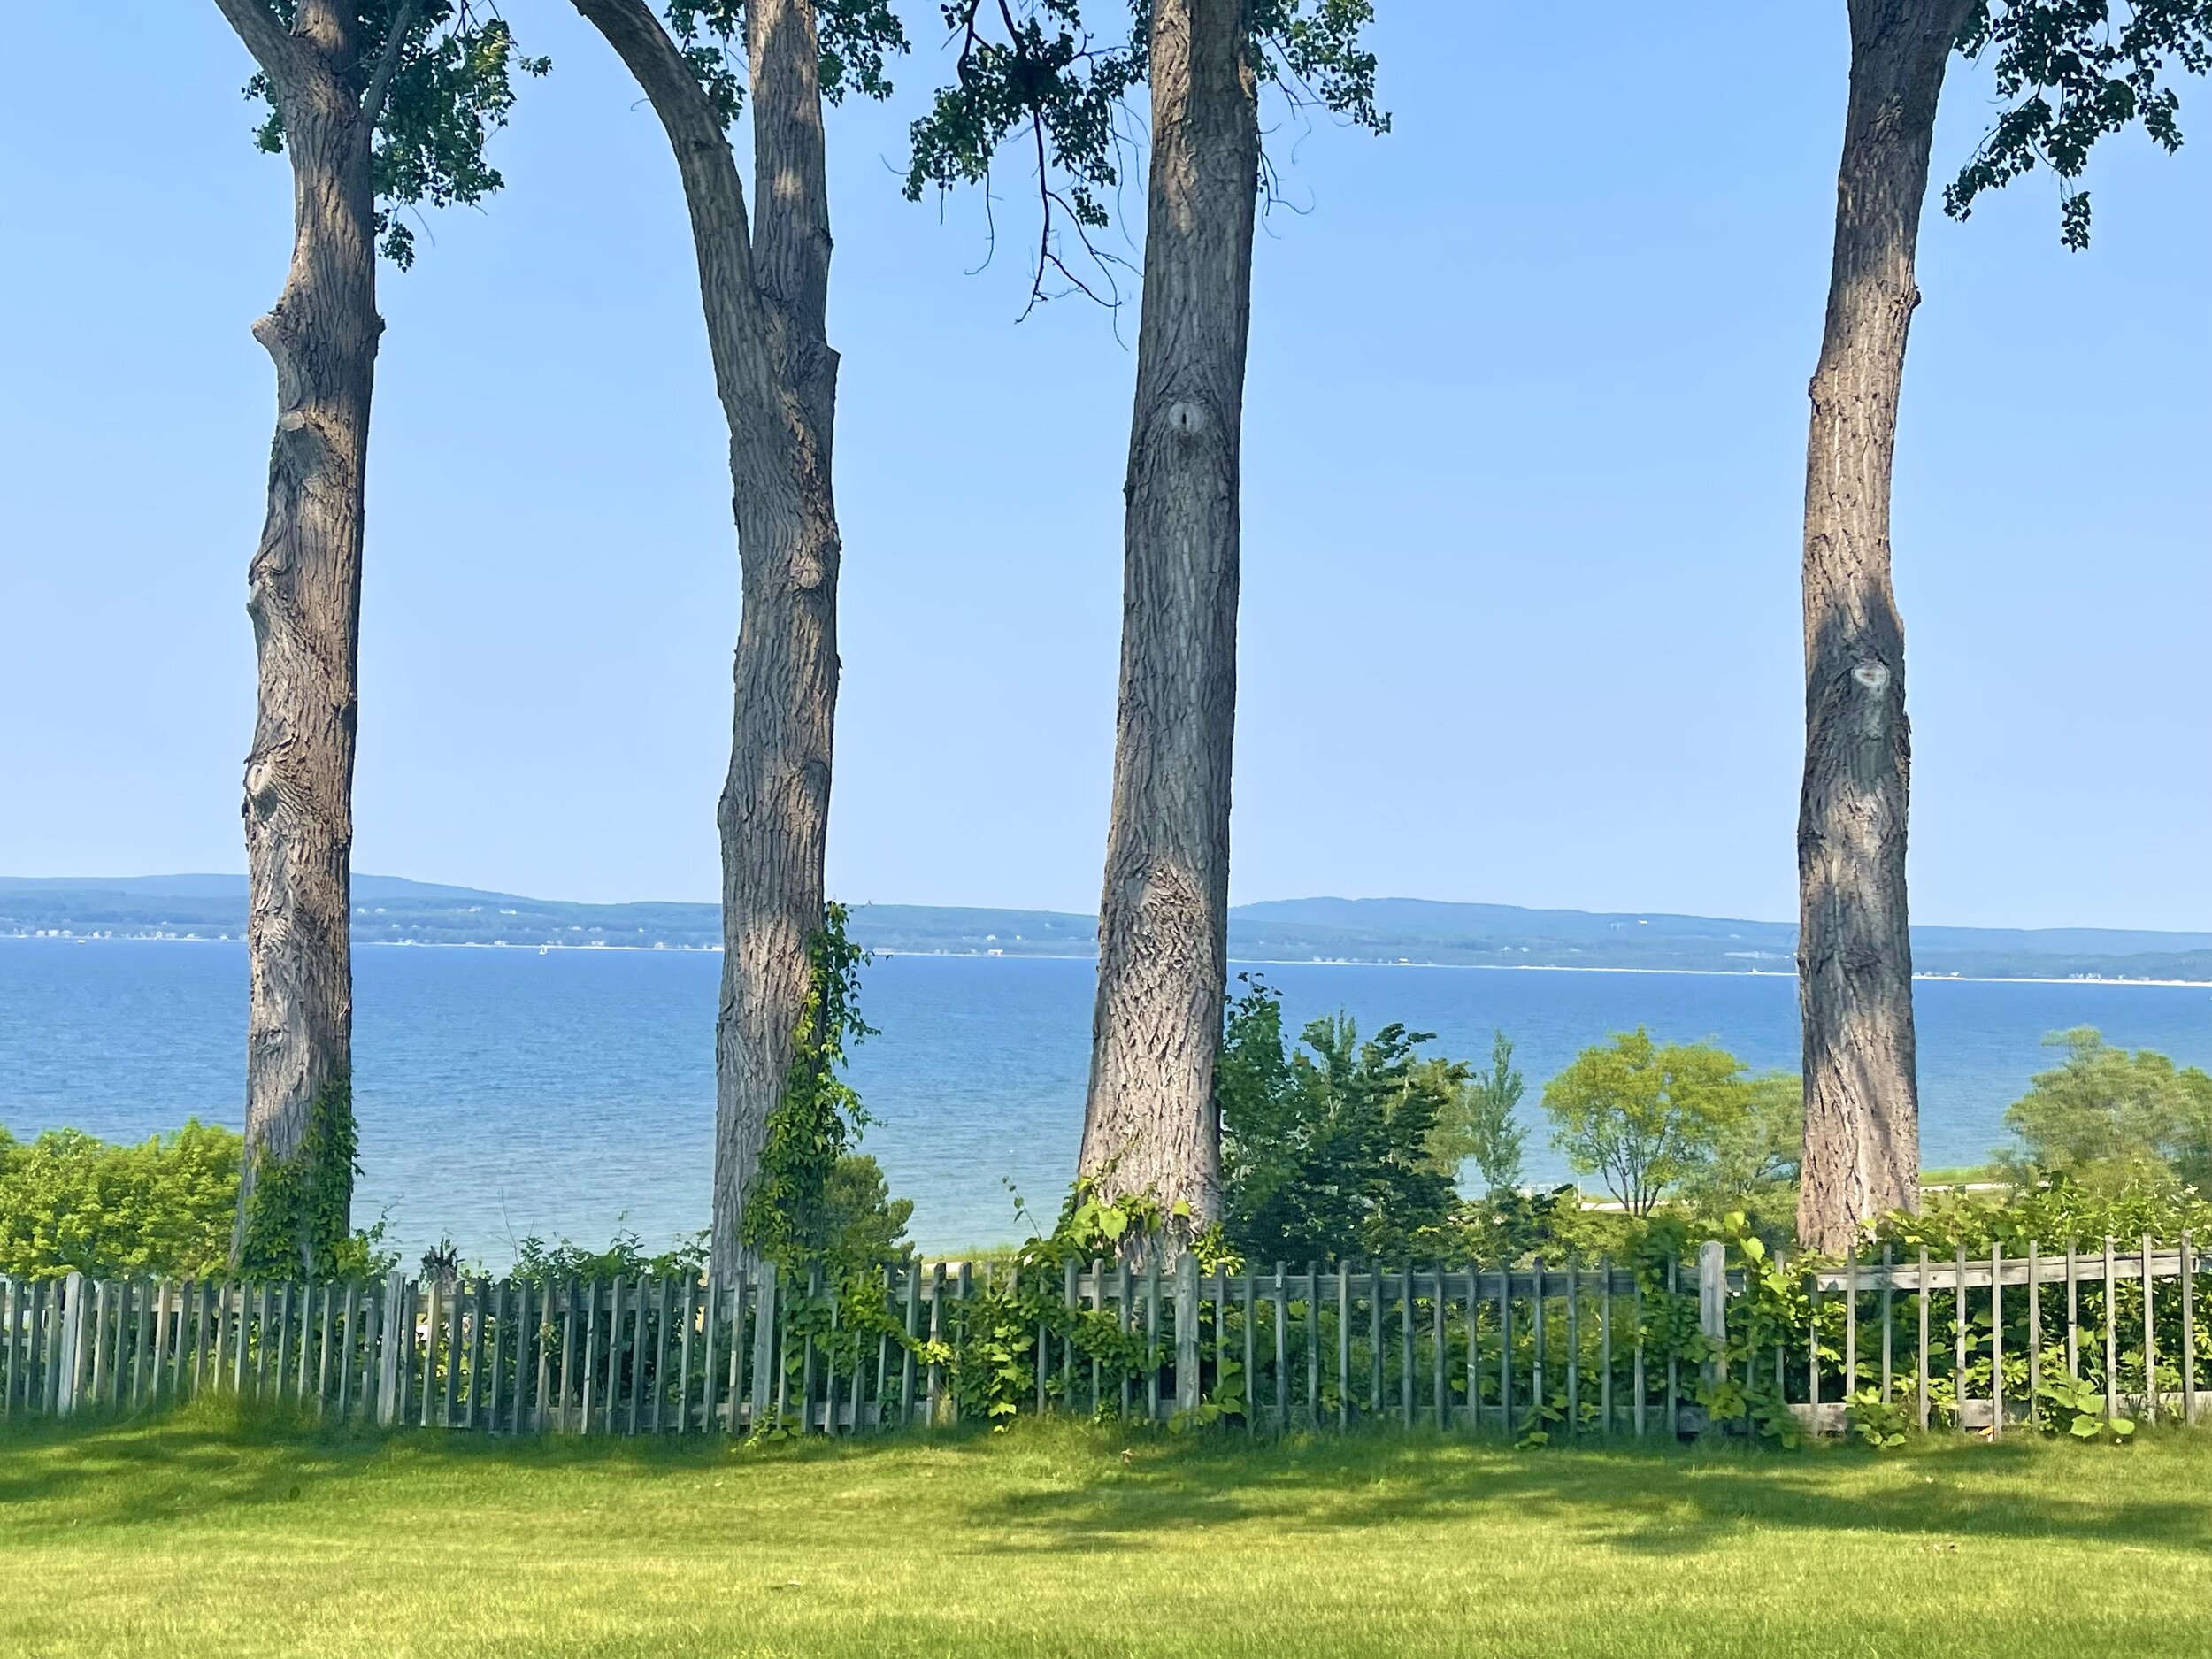  Situated on  Little Traverse Bay, Petoskey  is another charming coastal resort community. In this town, we had lunch at  Petoskey Brewing , and at the state park, we participated in a favorite local activity—searching for Michigan’s state stone—the 